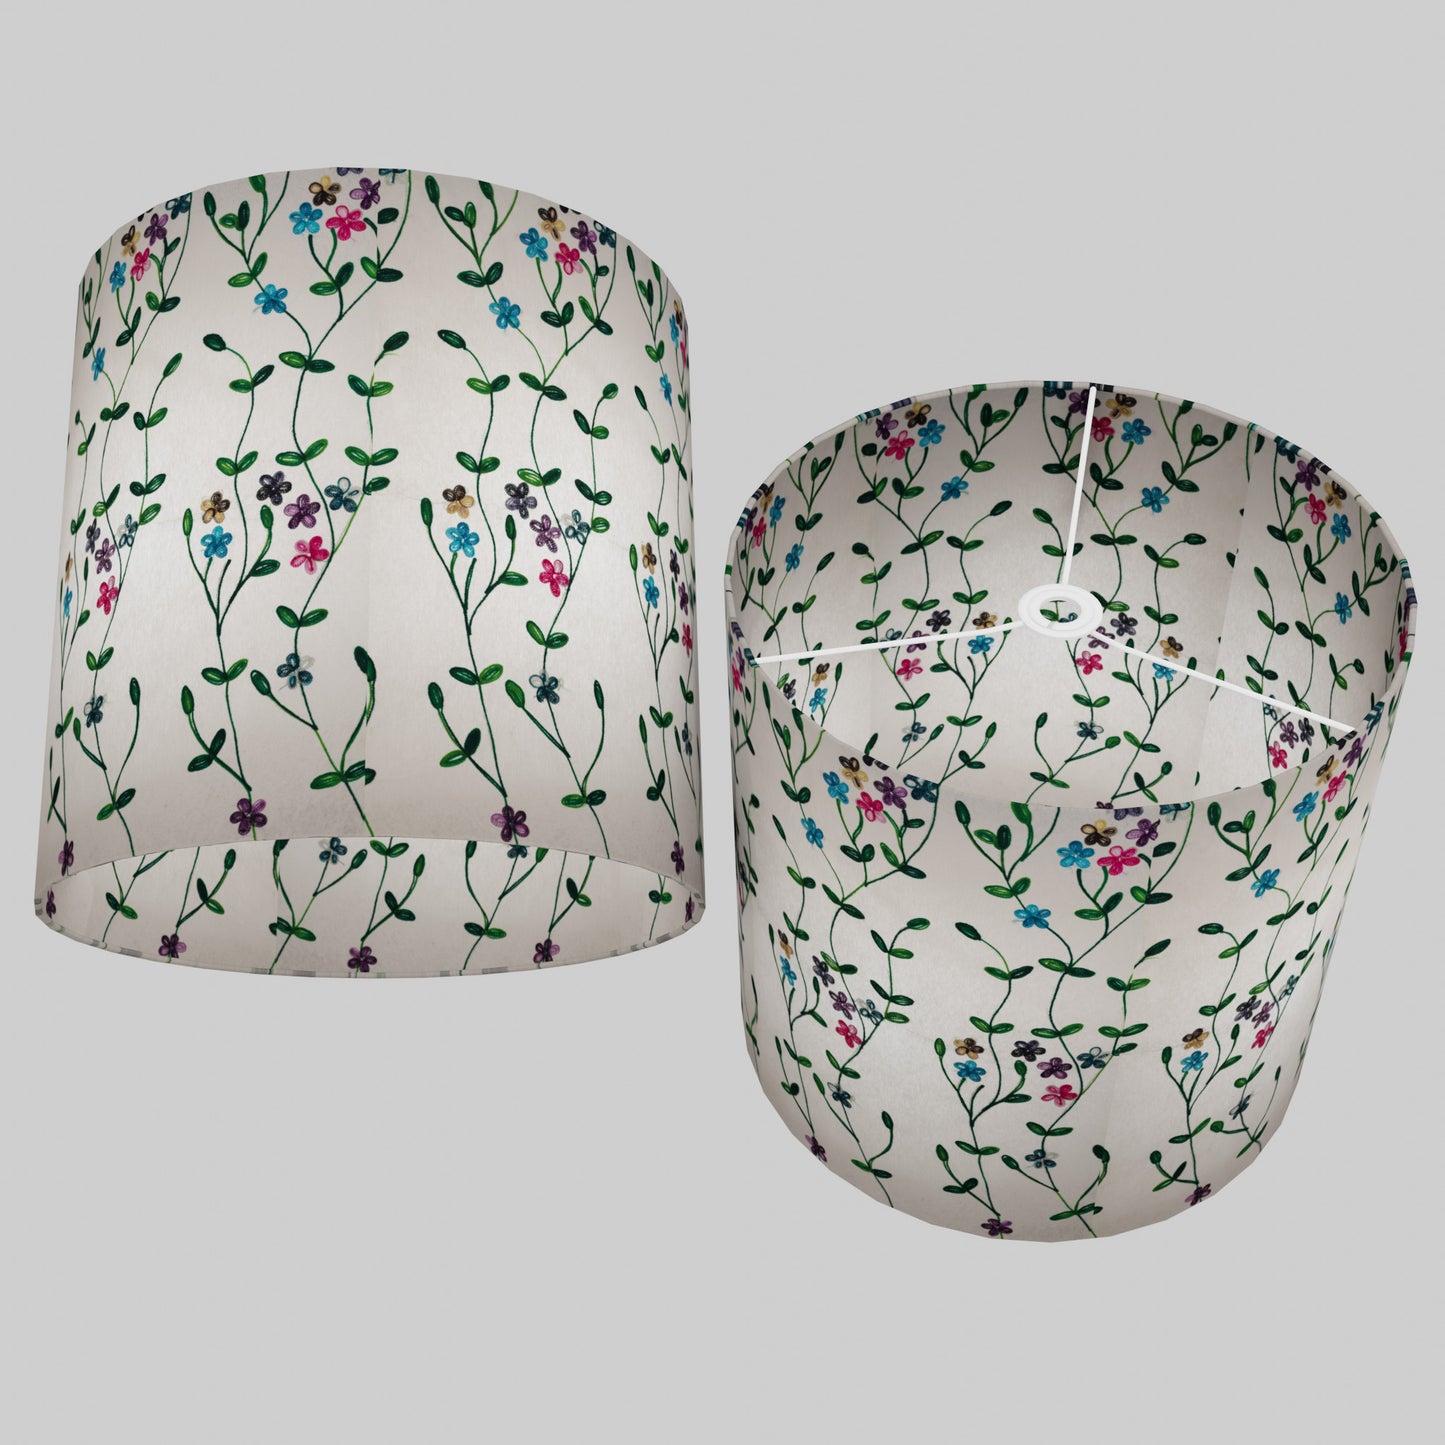 Drum Lamp Shade - P43 - Embroidered Flowers on White, 40cm(d) x 40cm(h)